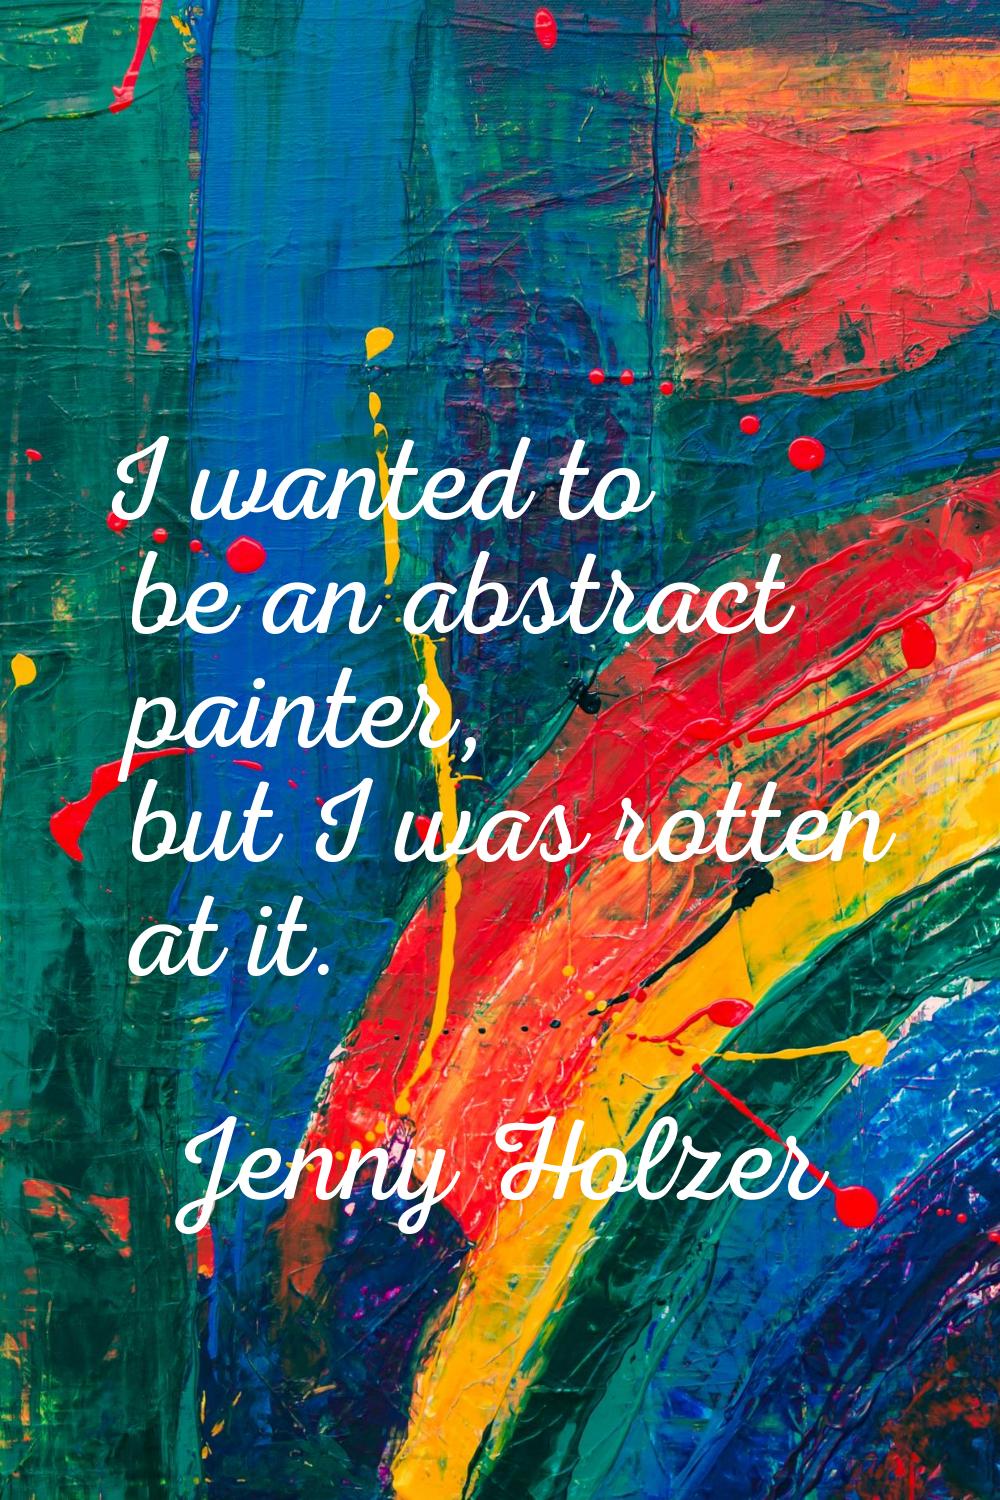 I wanted to be an abstract painter, but I was rotten at it.